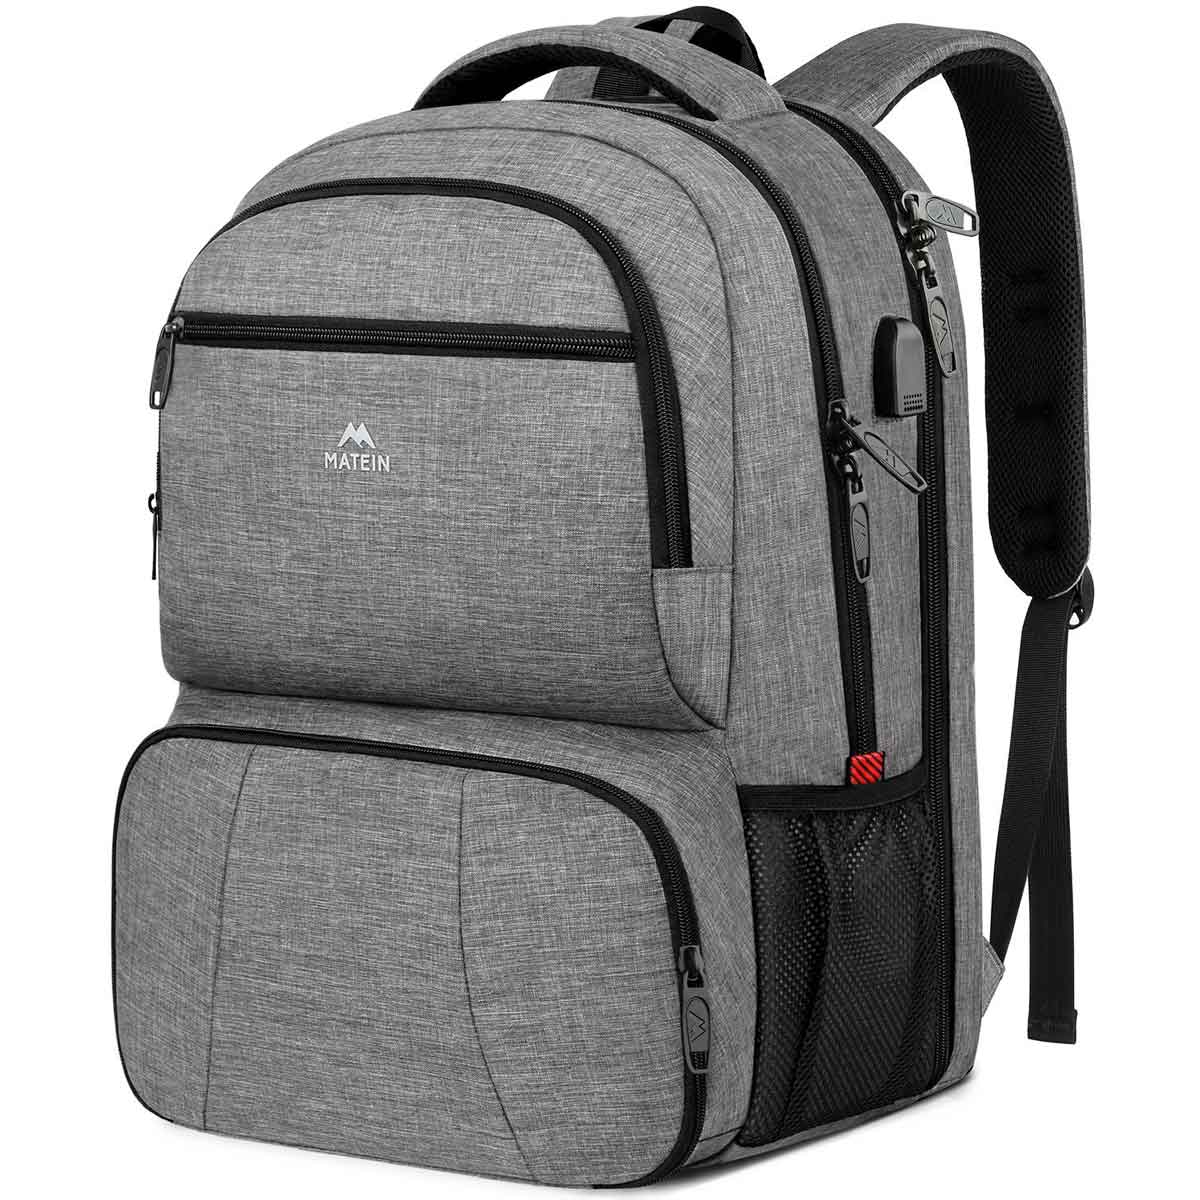 Best Lunch Box Backpack For Adults - 11 Lunch Box Backpack Options